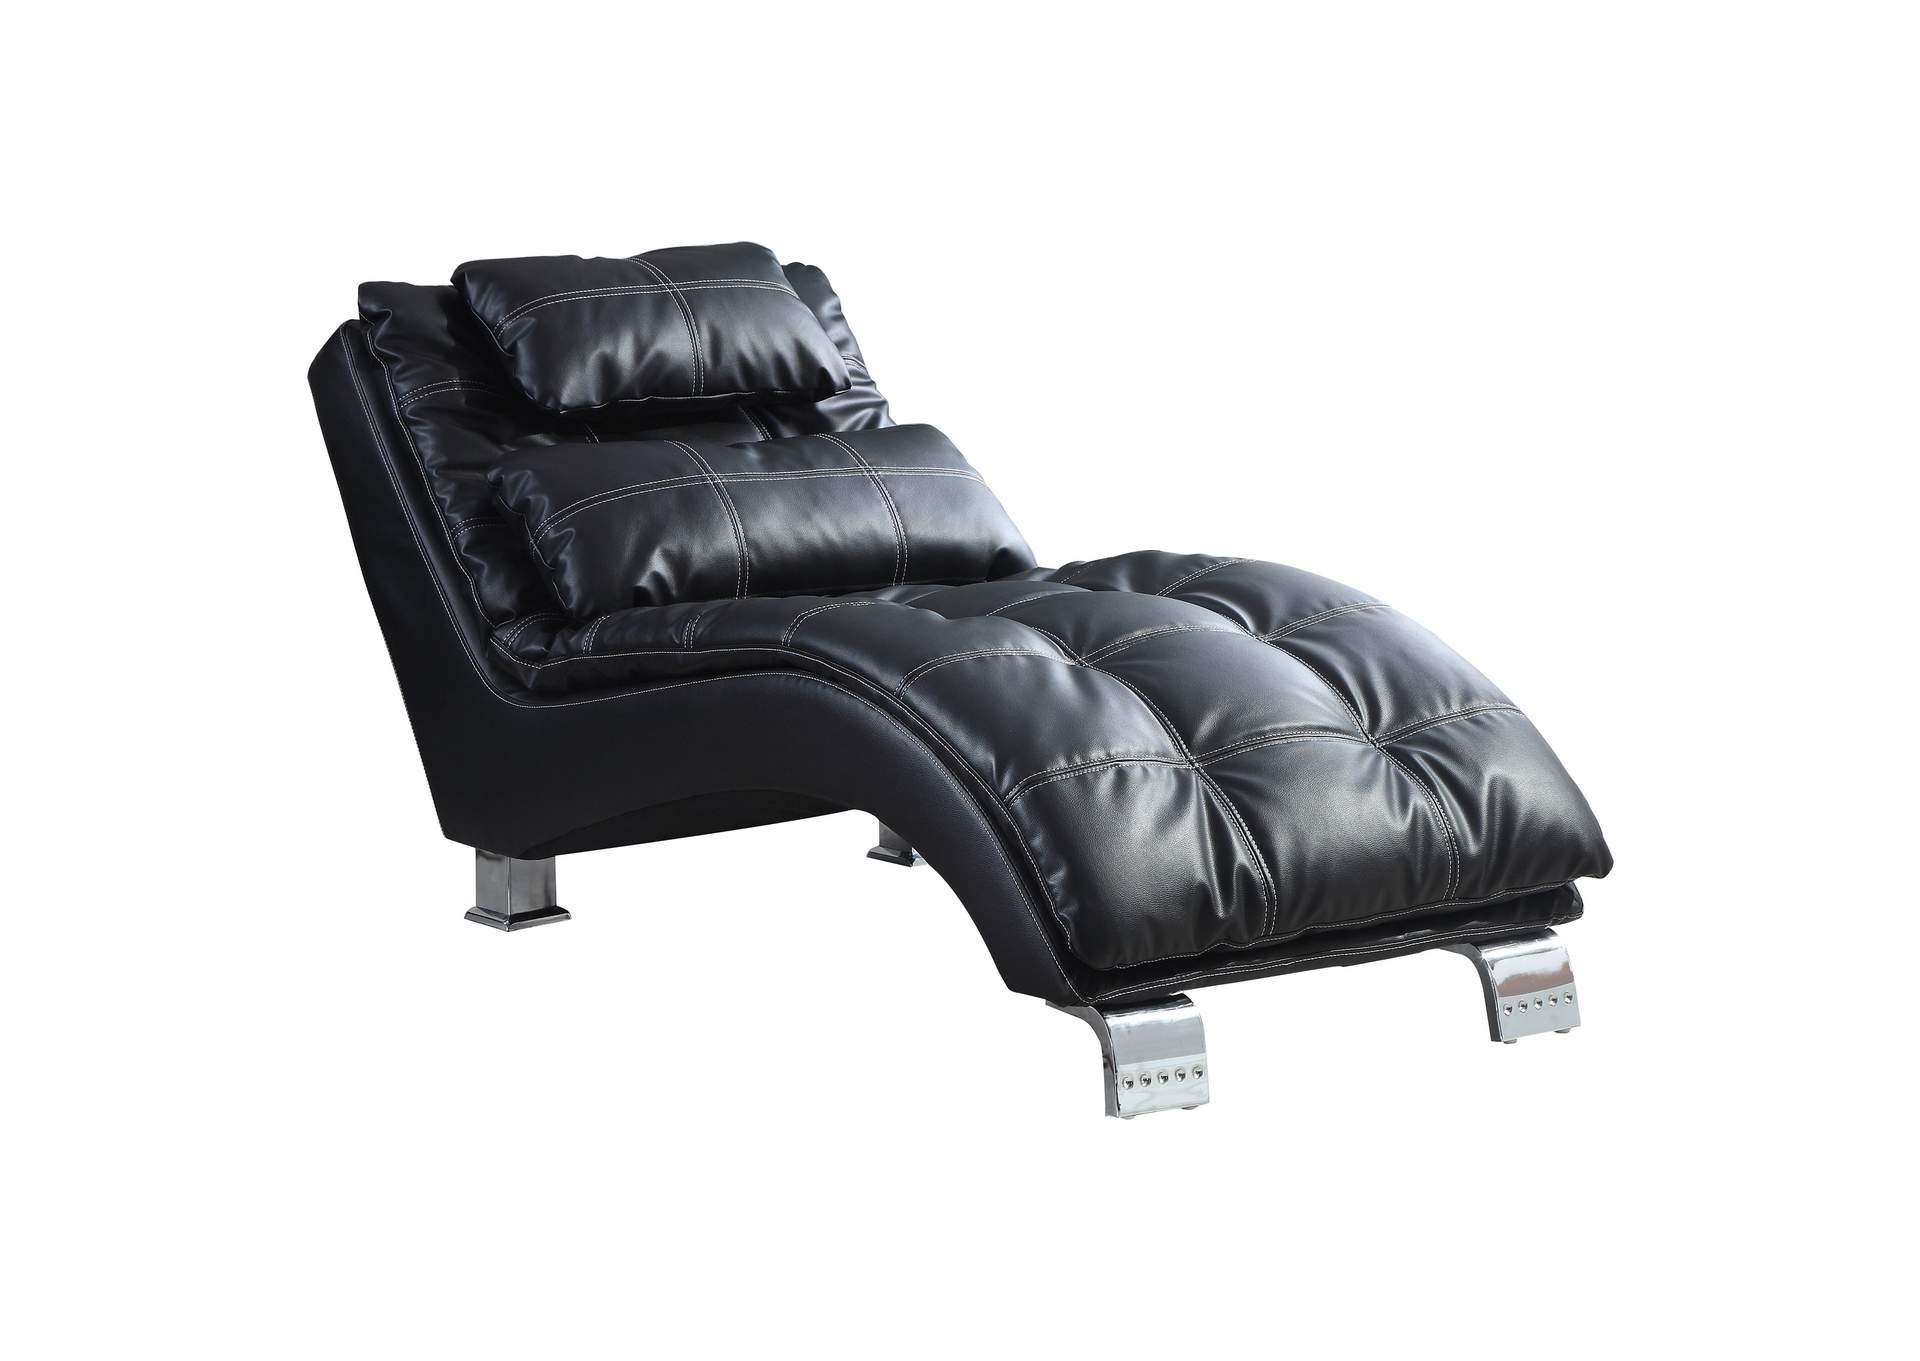 Dilleston Upholstered Chaise Black,Coaster Furniture